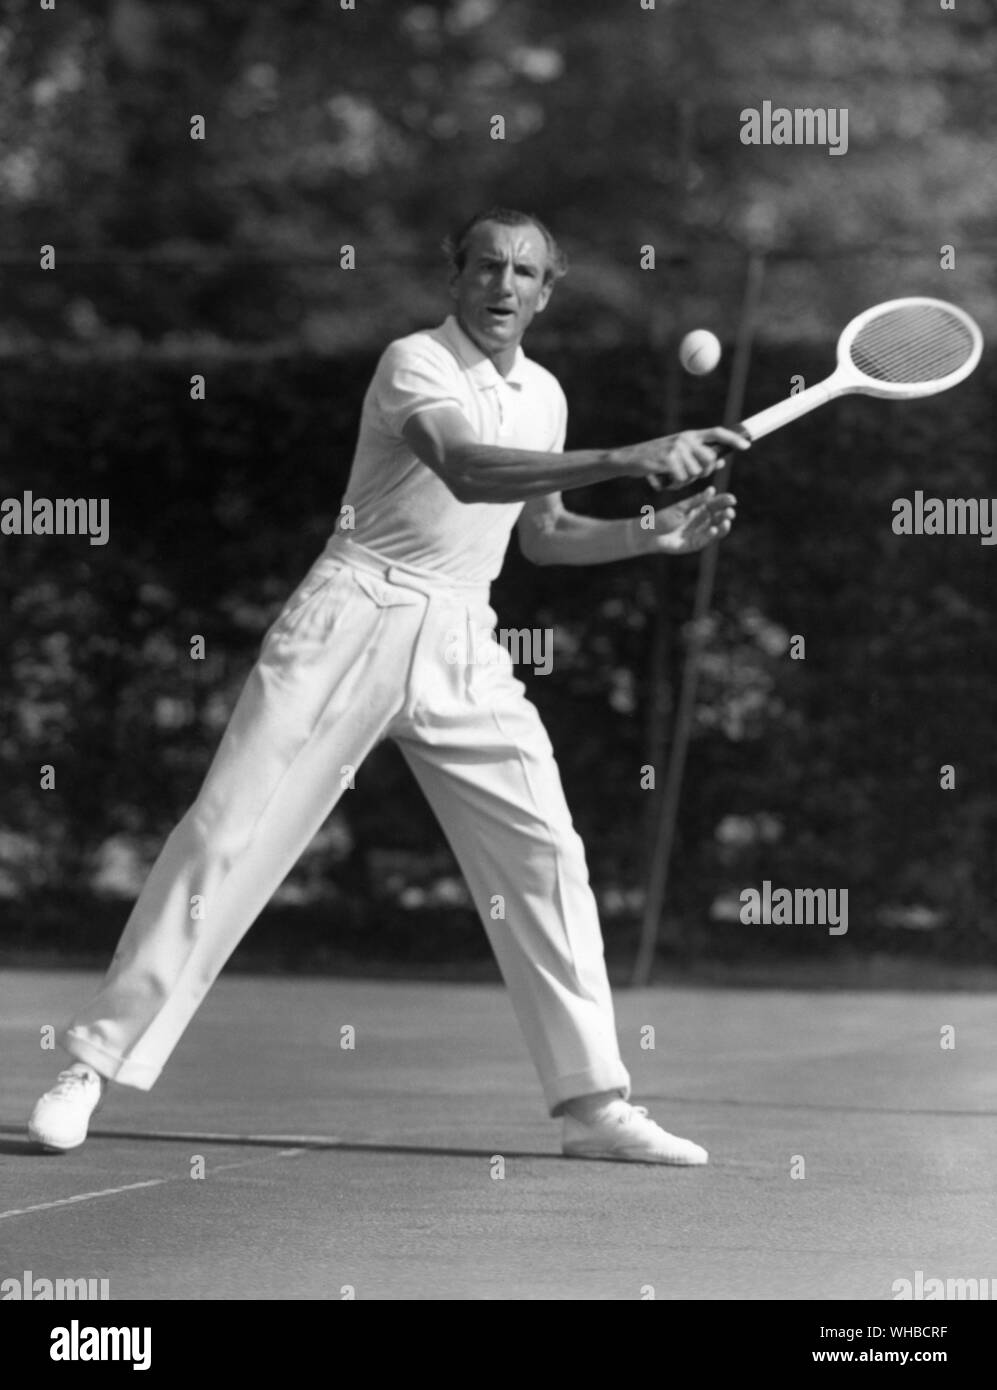 Fred Perry - Frederick John Perry (May 18, 1909 - February 2, 1995) born in Stockport, Cheshire. was an English tennis player and three-time Wimbledon champion. He was the World No. 1 player for five years, four of them consecutive, 1934 through 1938, the first three years as an amateur. He was the last Englishman to win Wimbledon.. Stock Photo